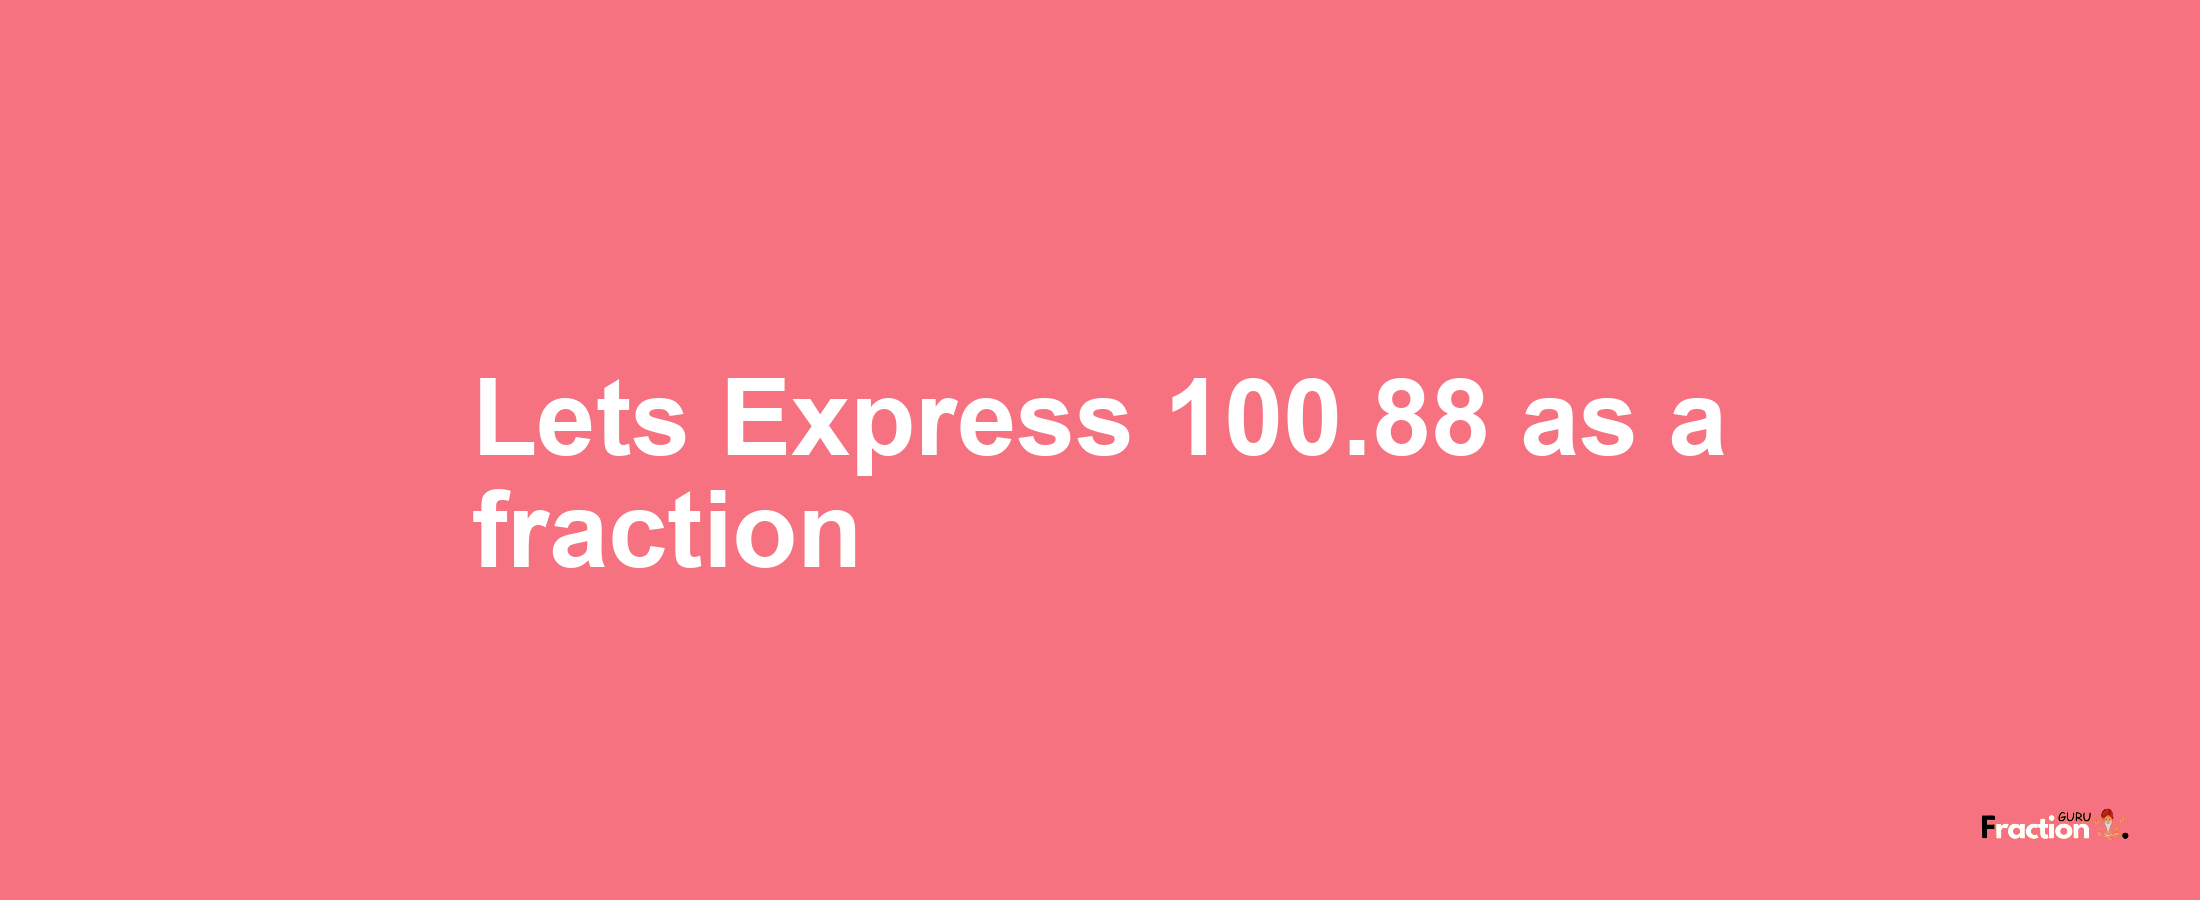 Lets Express 100.88 as afraction